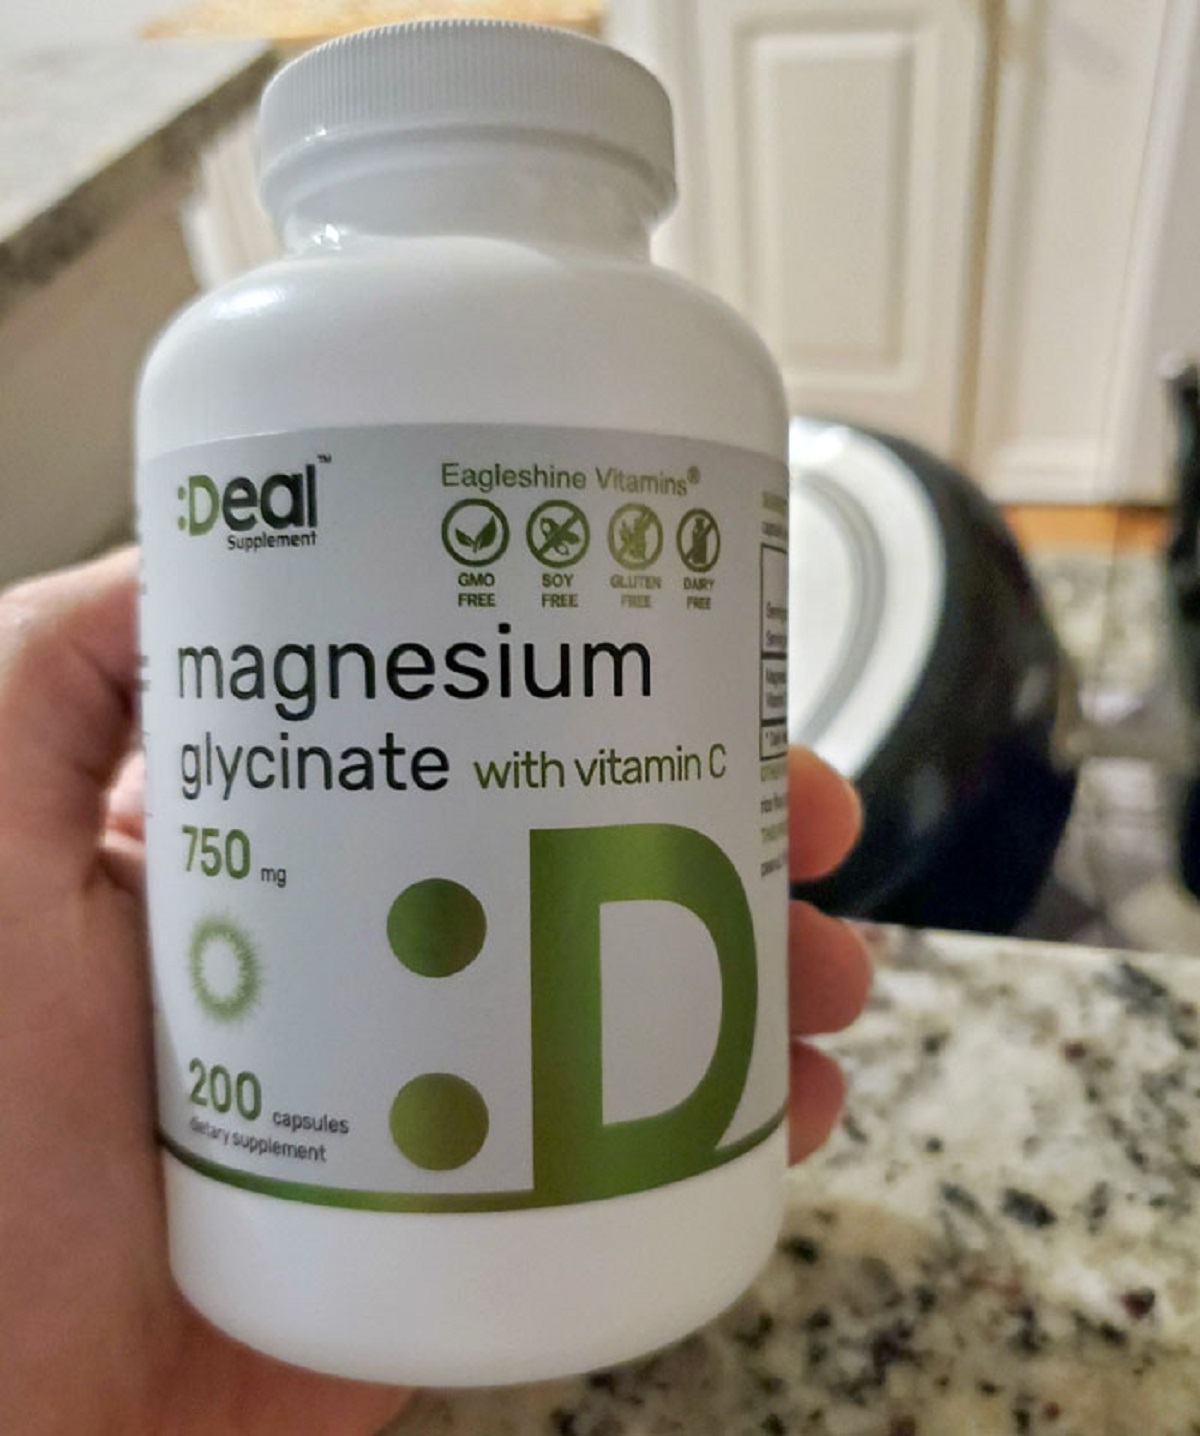 This Is Not Vitamin D. It's An Emoji On A Bottle Of Magnesium